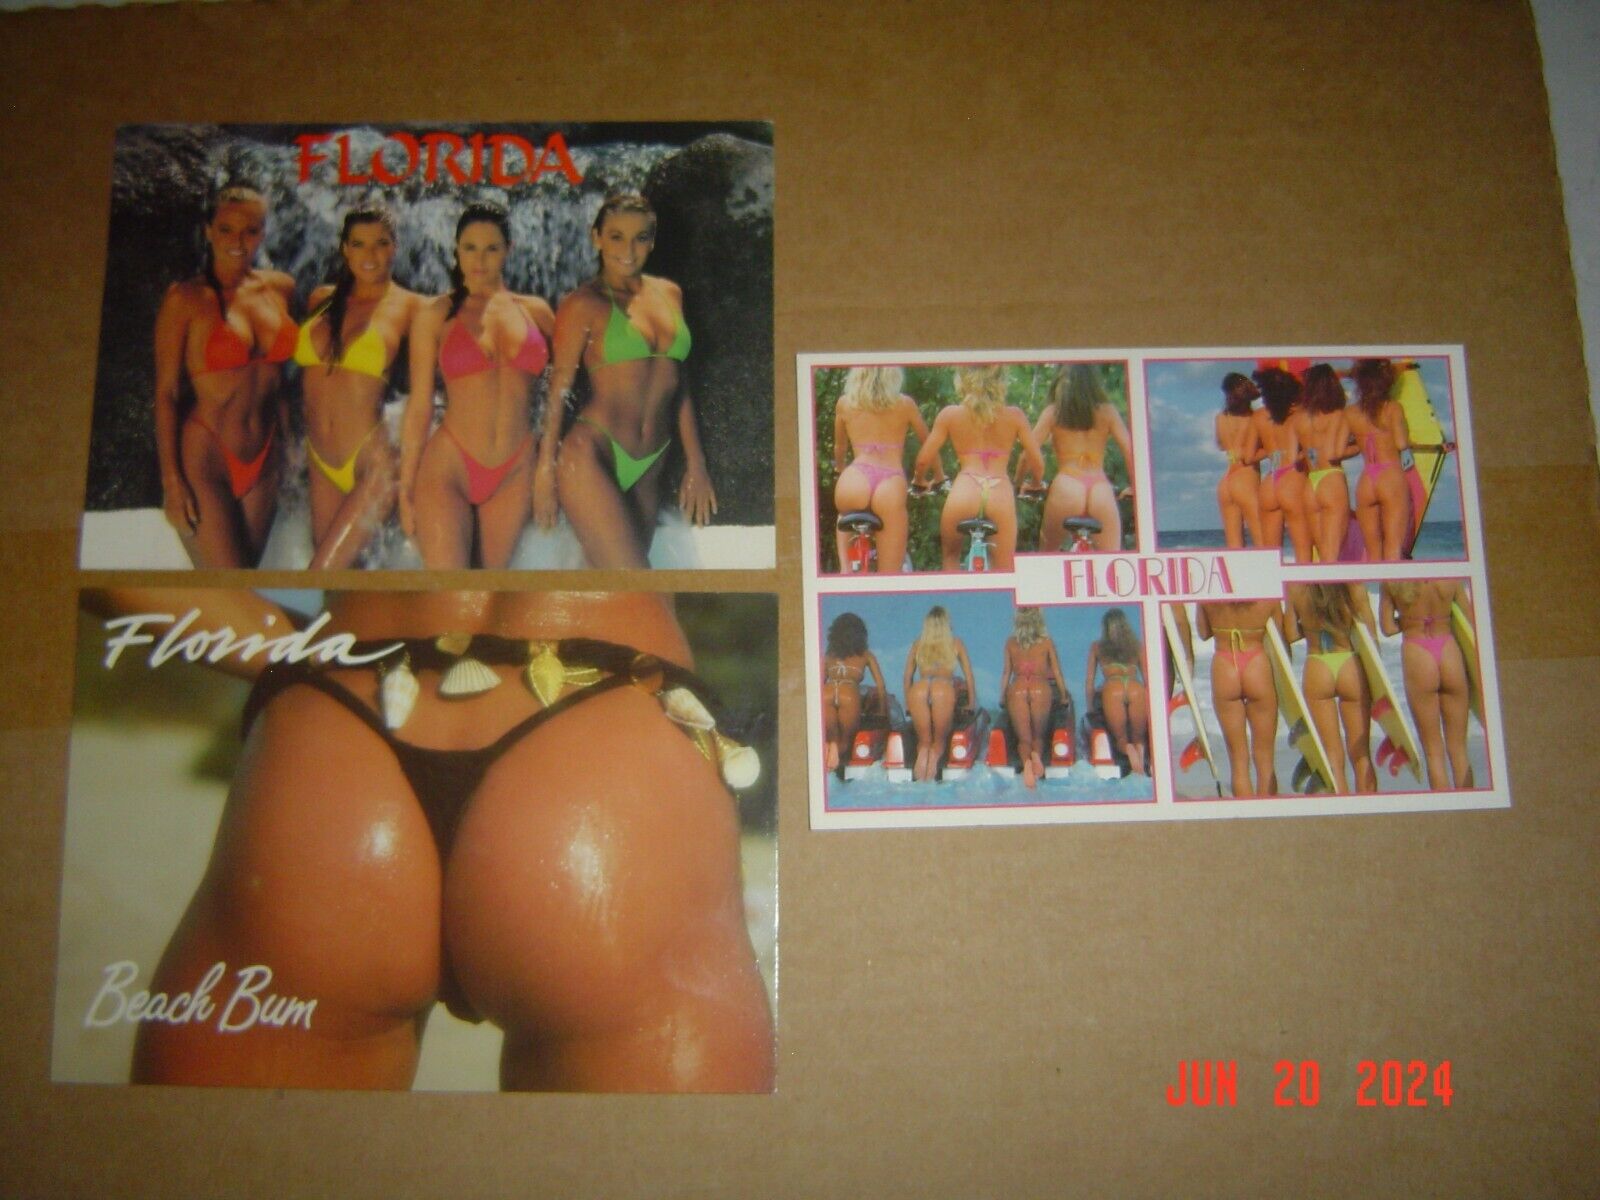 Sexy FLORIDA Postcards (4.5-in x 6.5-in) with ladies in swimsuits - lot of 3